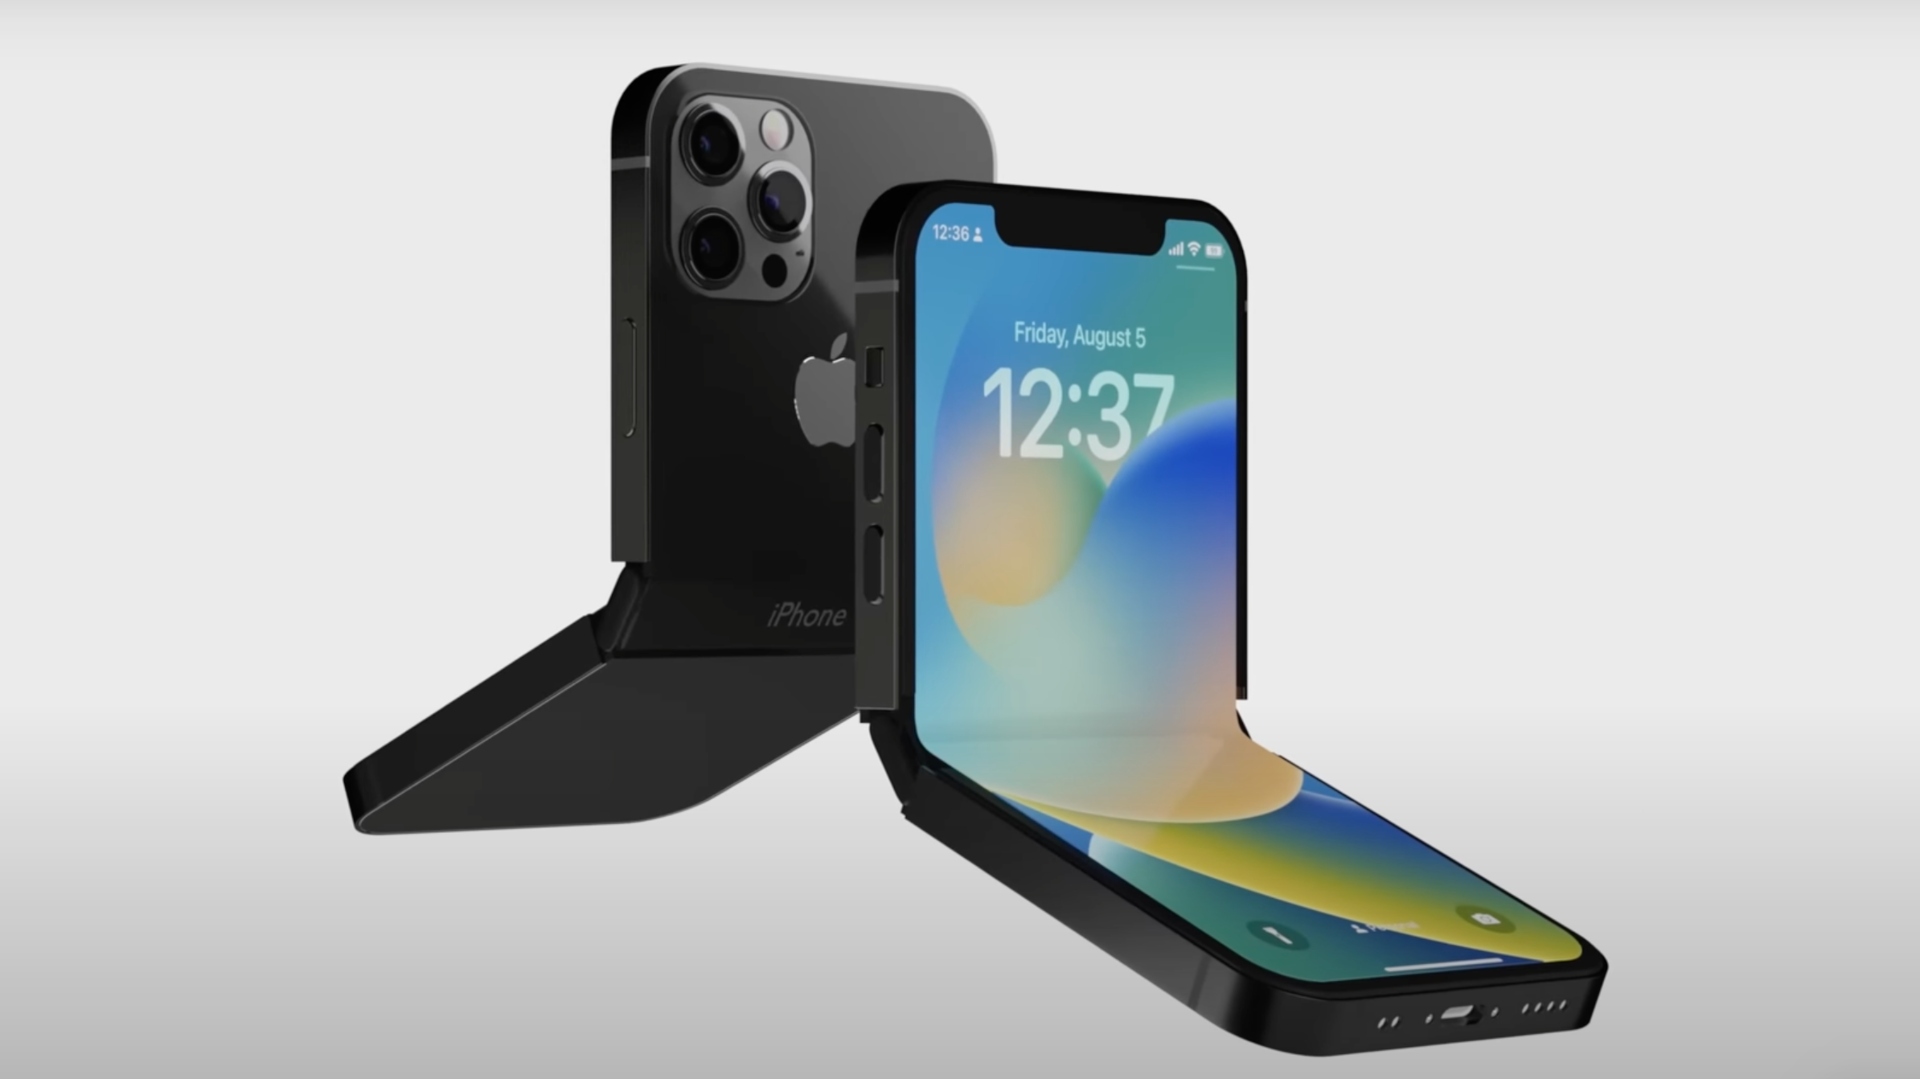 iPhone Flip: is it really happening? Everything we know